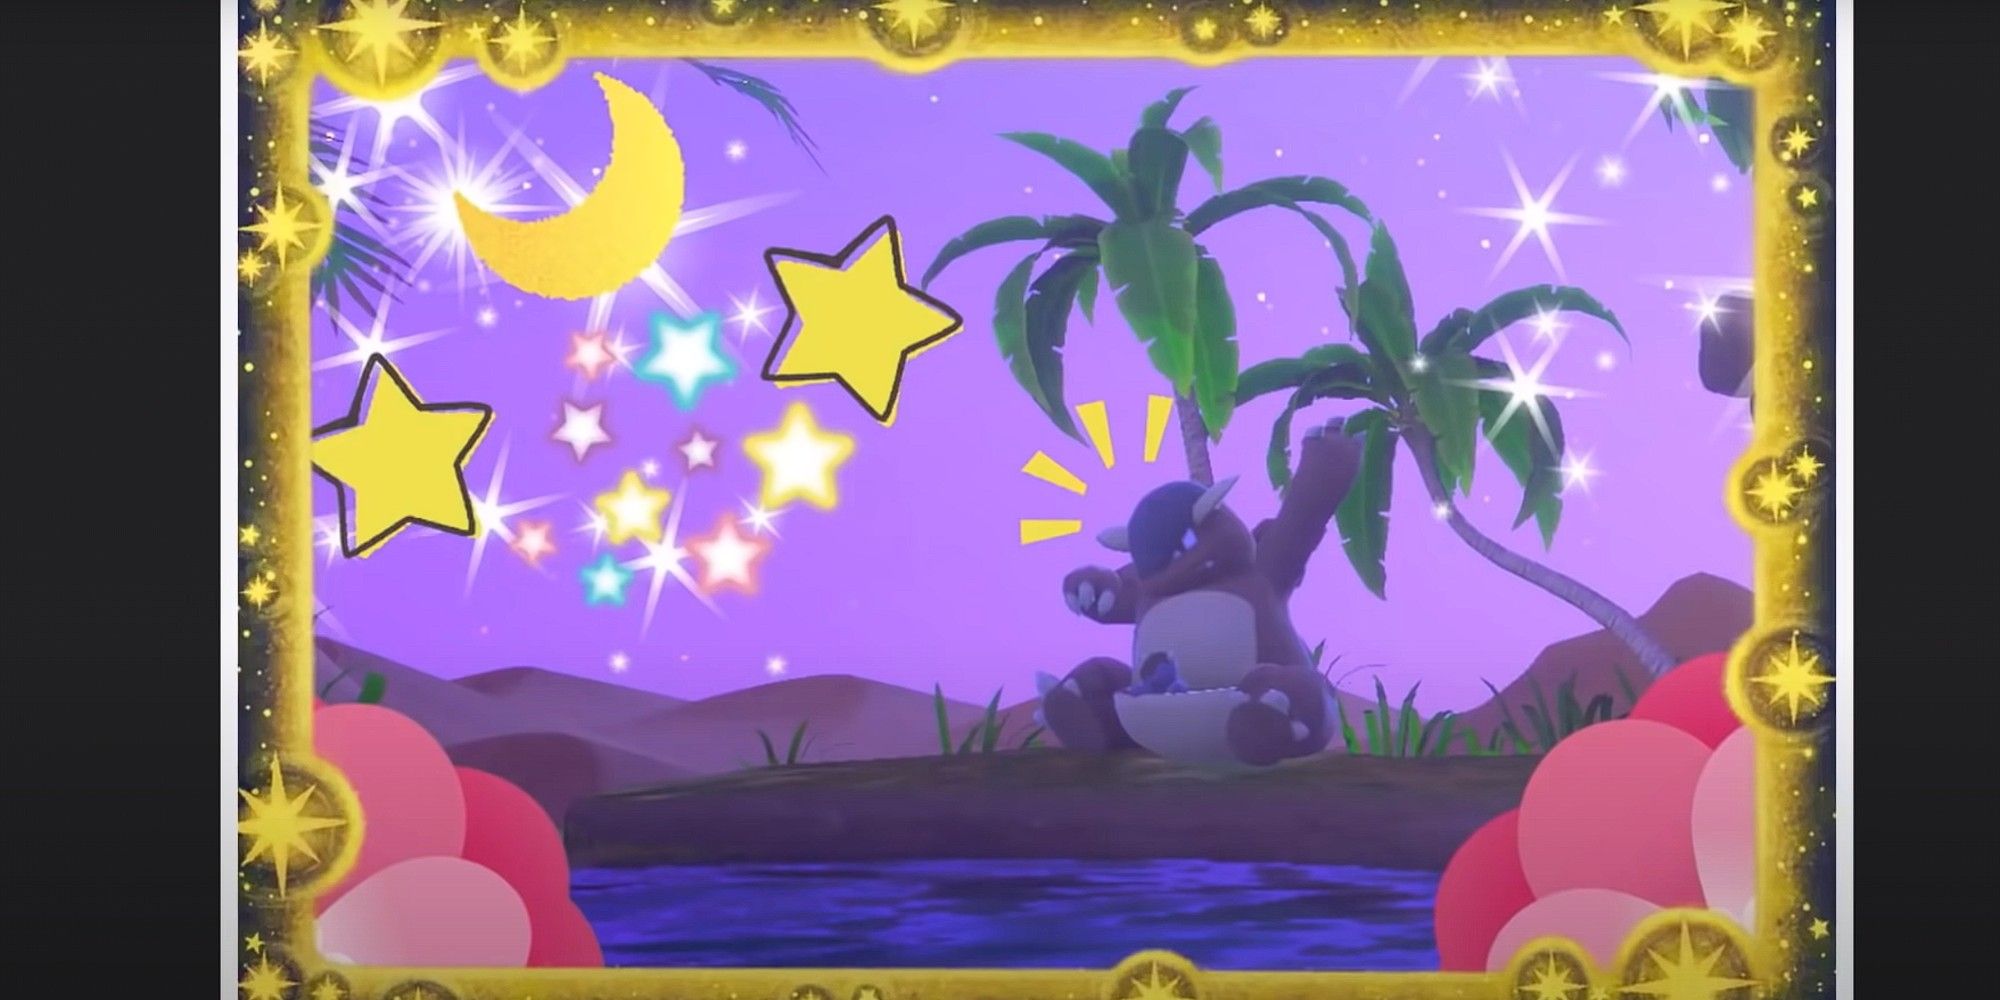 A player can add stickers and borders to their photos in New Pokémon Snap